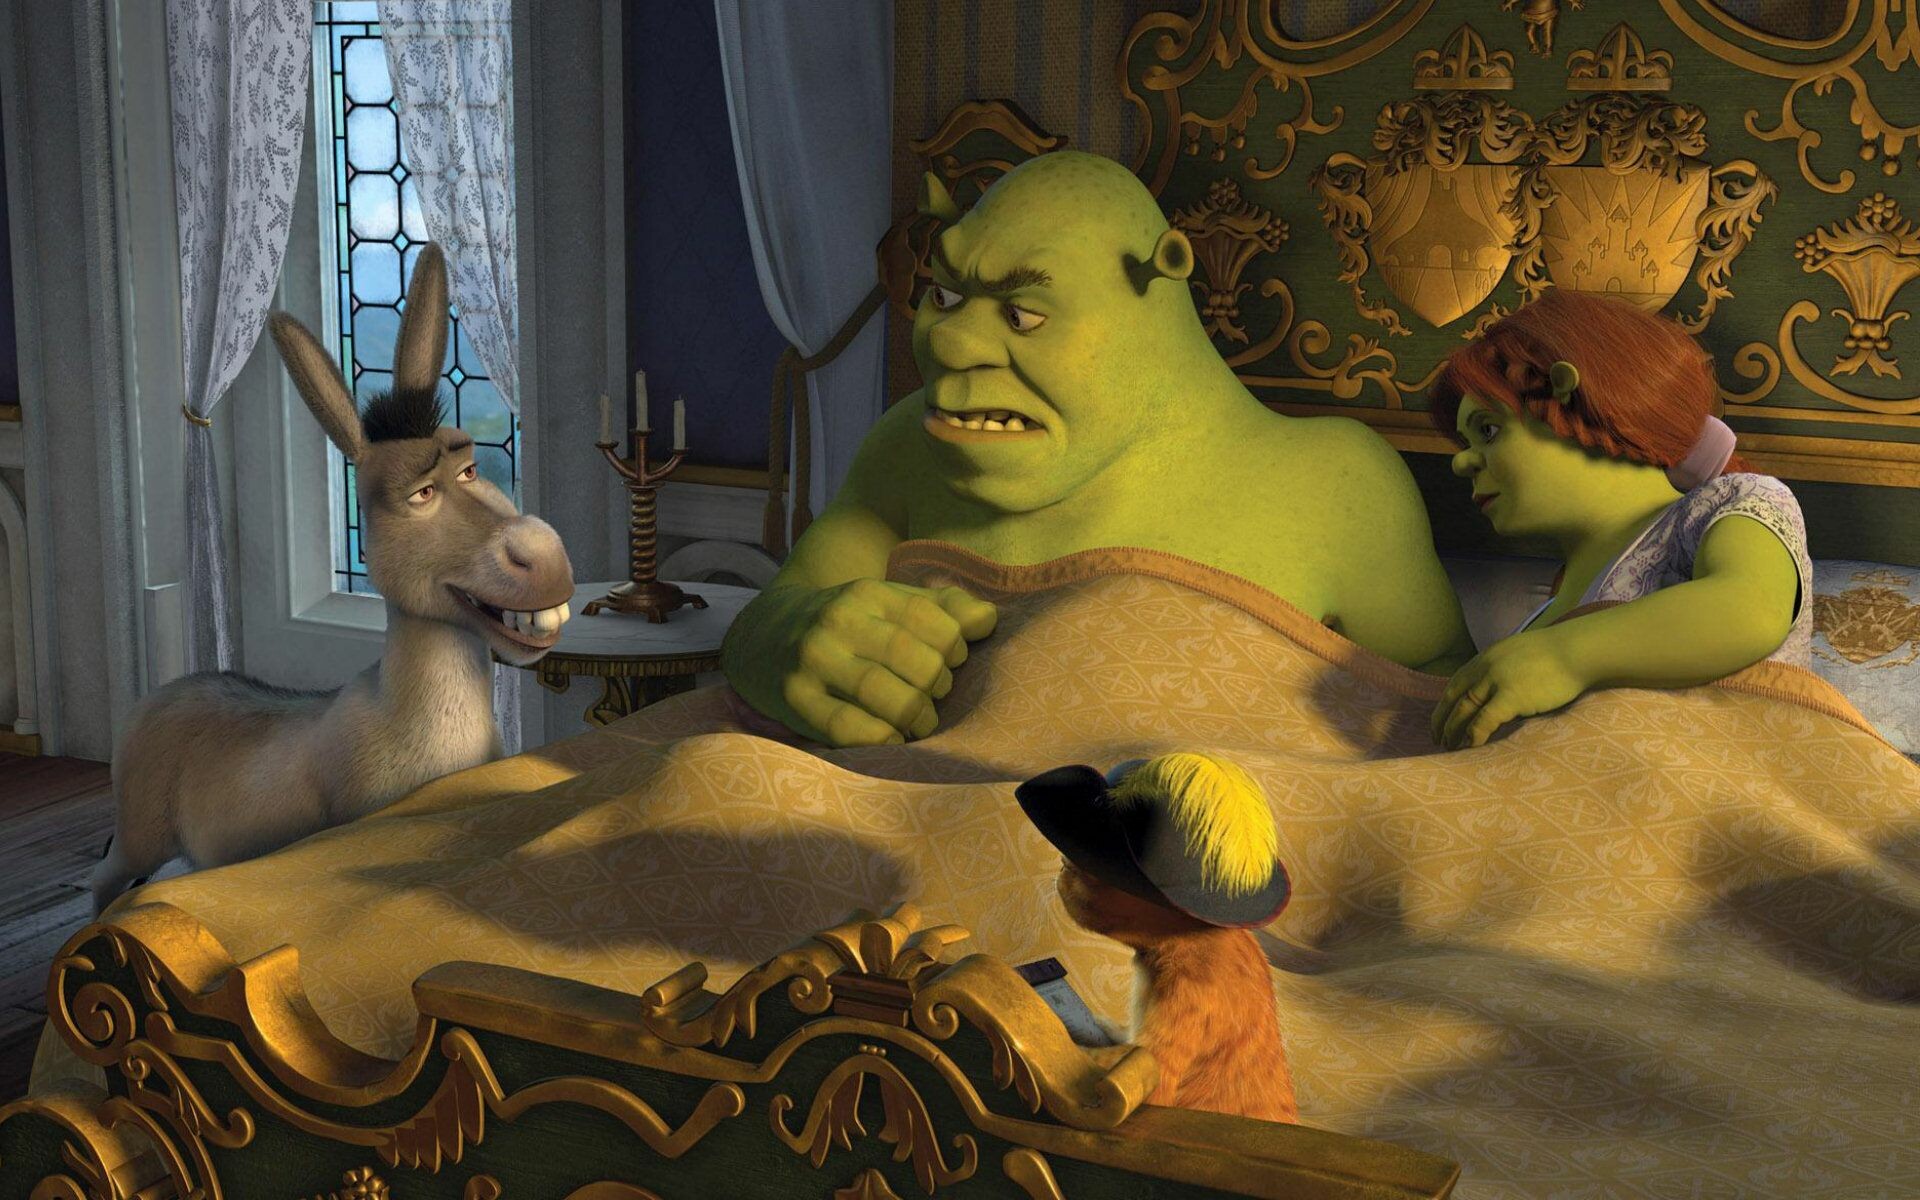 Shrek: A screenplay written by Miller, Warner, and the writing team of Jeffrey Price and Peter S. Seaman, based on a story by Andrew Adamson, the co-director of the previous installments, 2007. 1920x1200 HD Wallpaper.